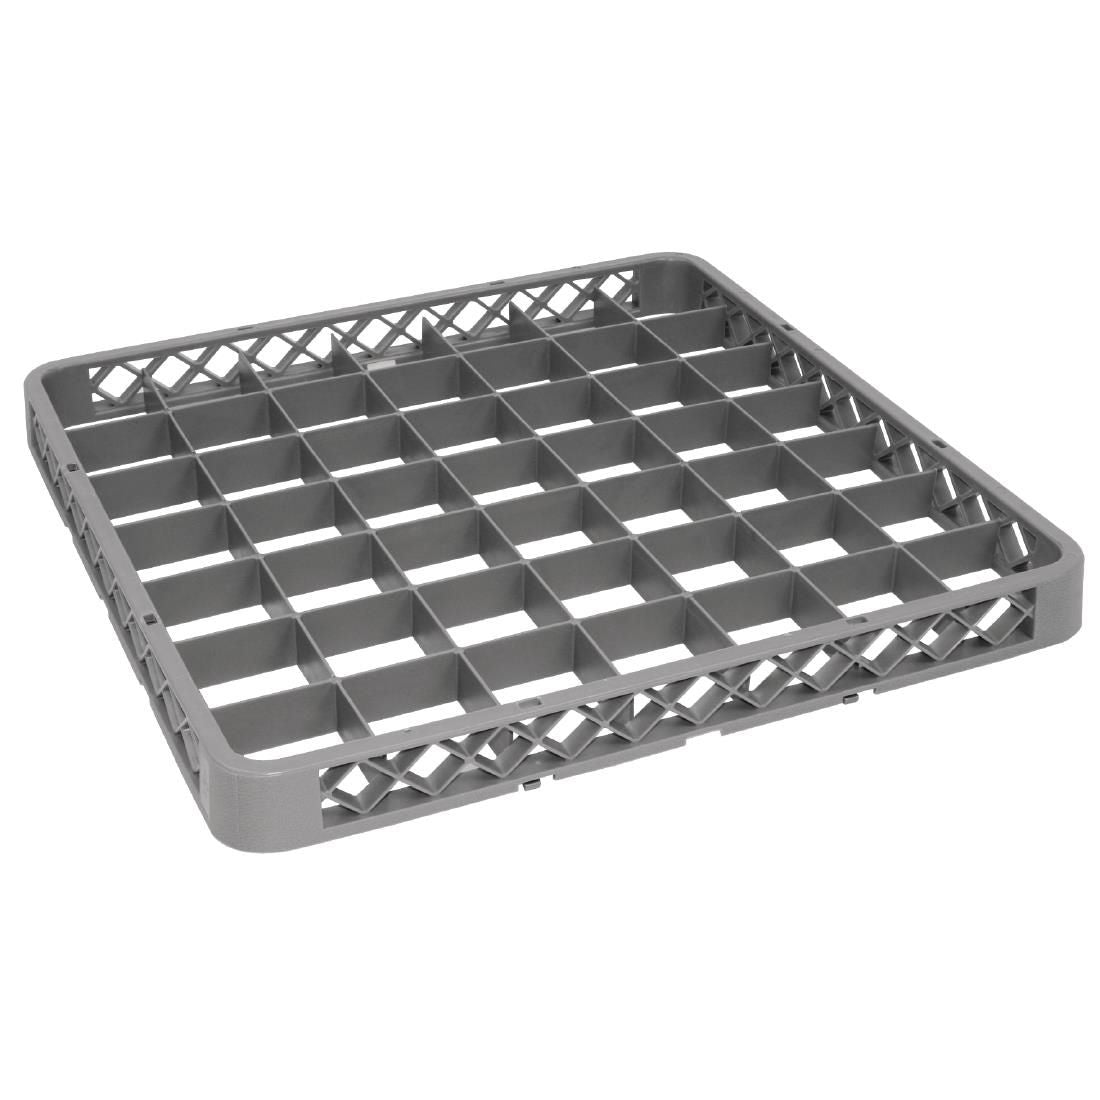 Glass Rack Extenders 49 Compartments JD Catering Equipment Solutions Ltd